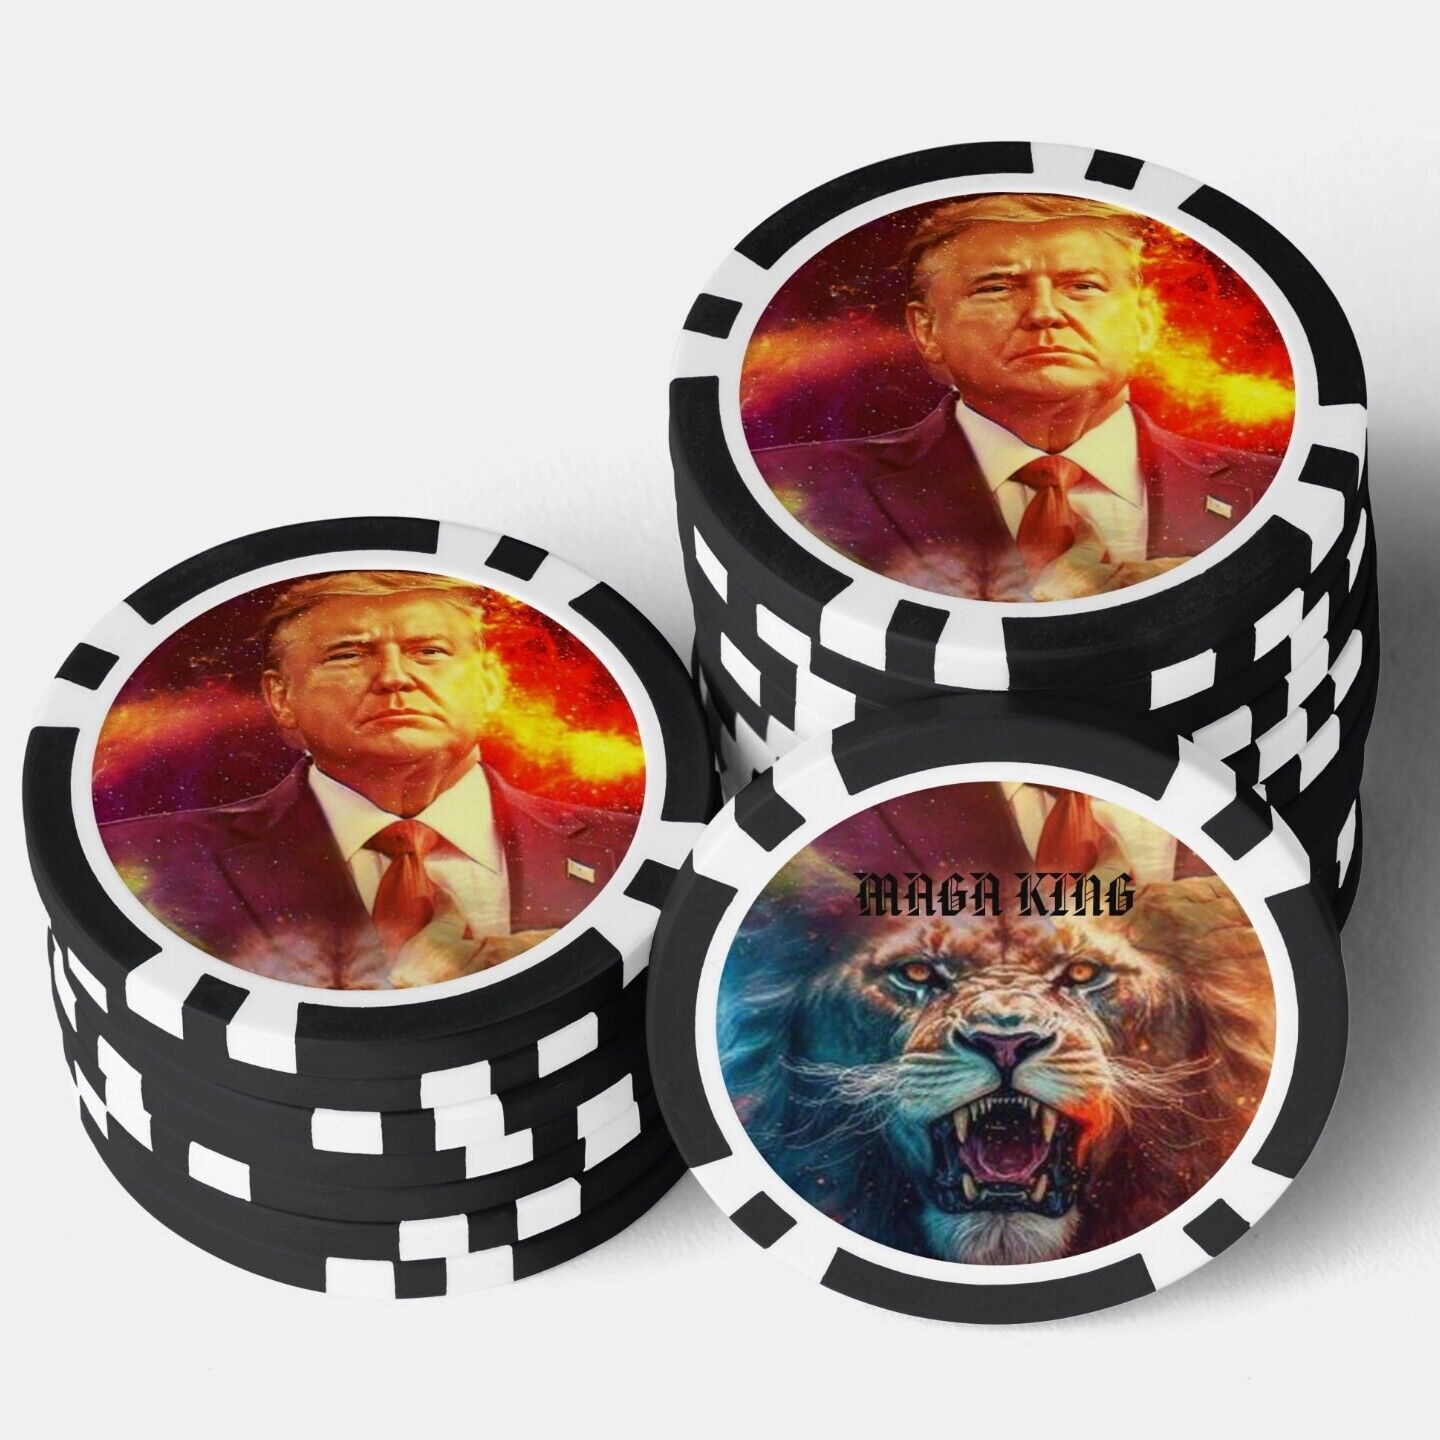 MAGA KING Donald J Trump (10) Poker Chips . Double Sided. 